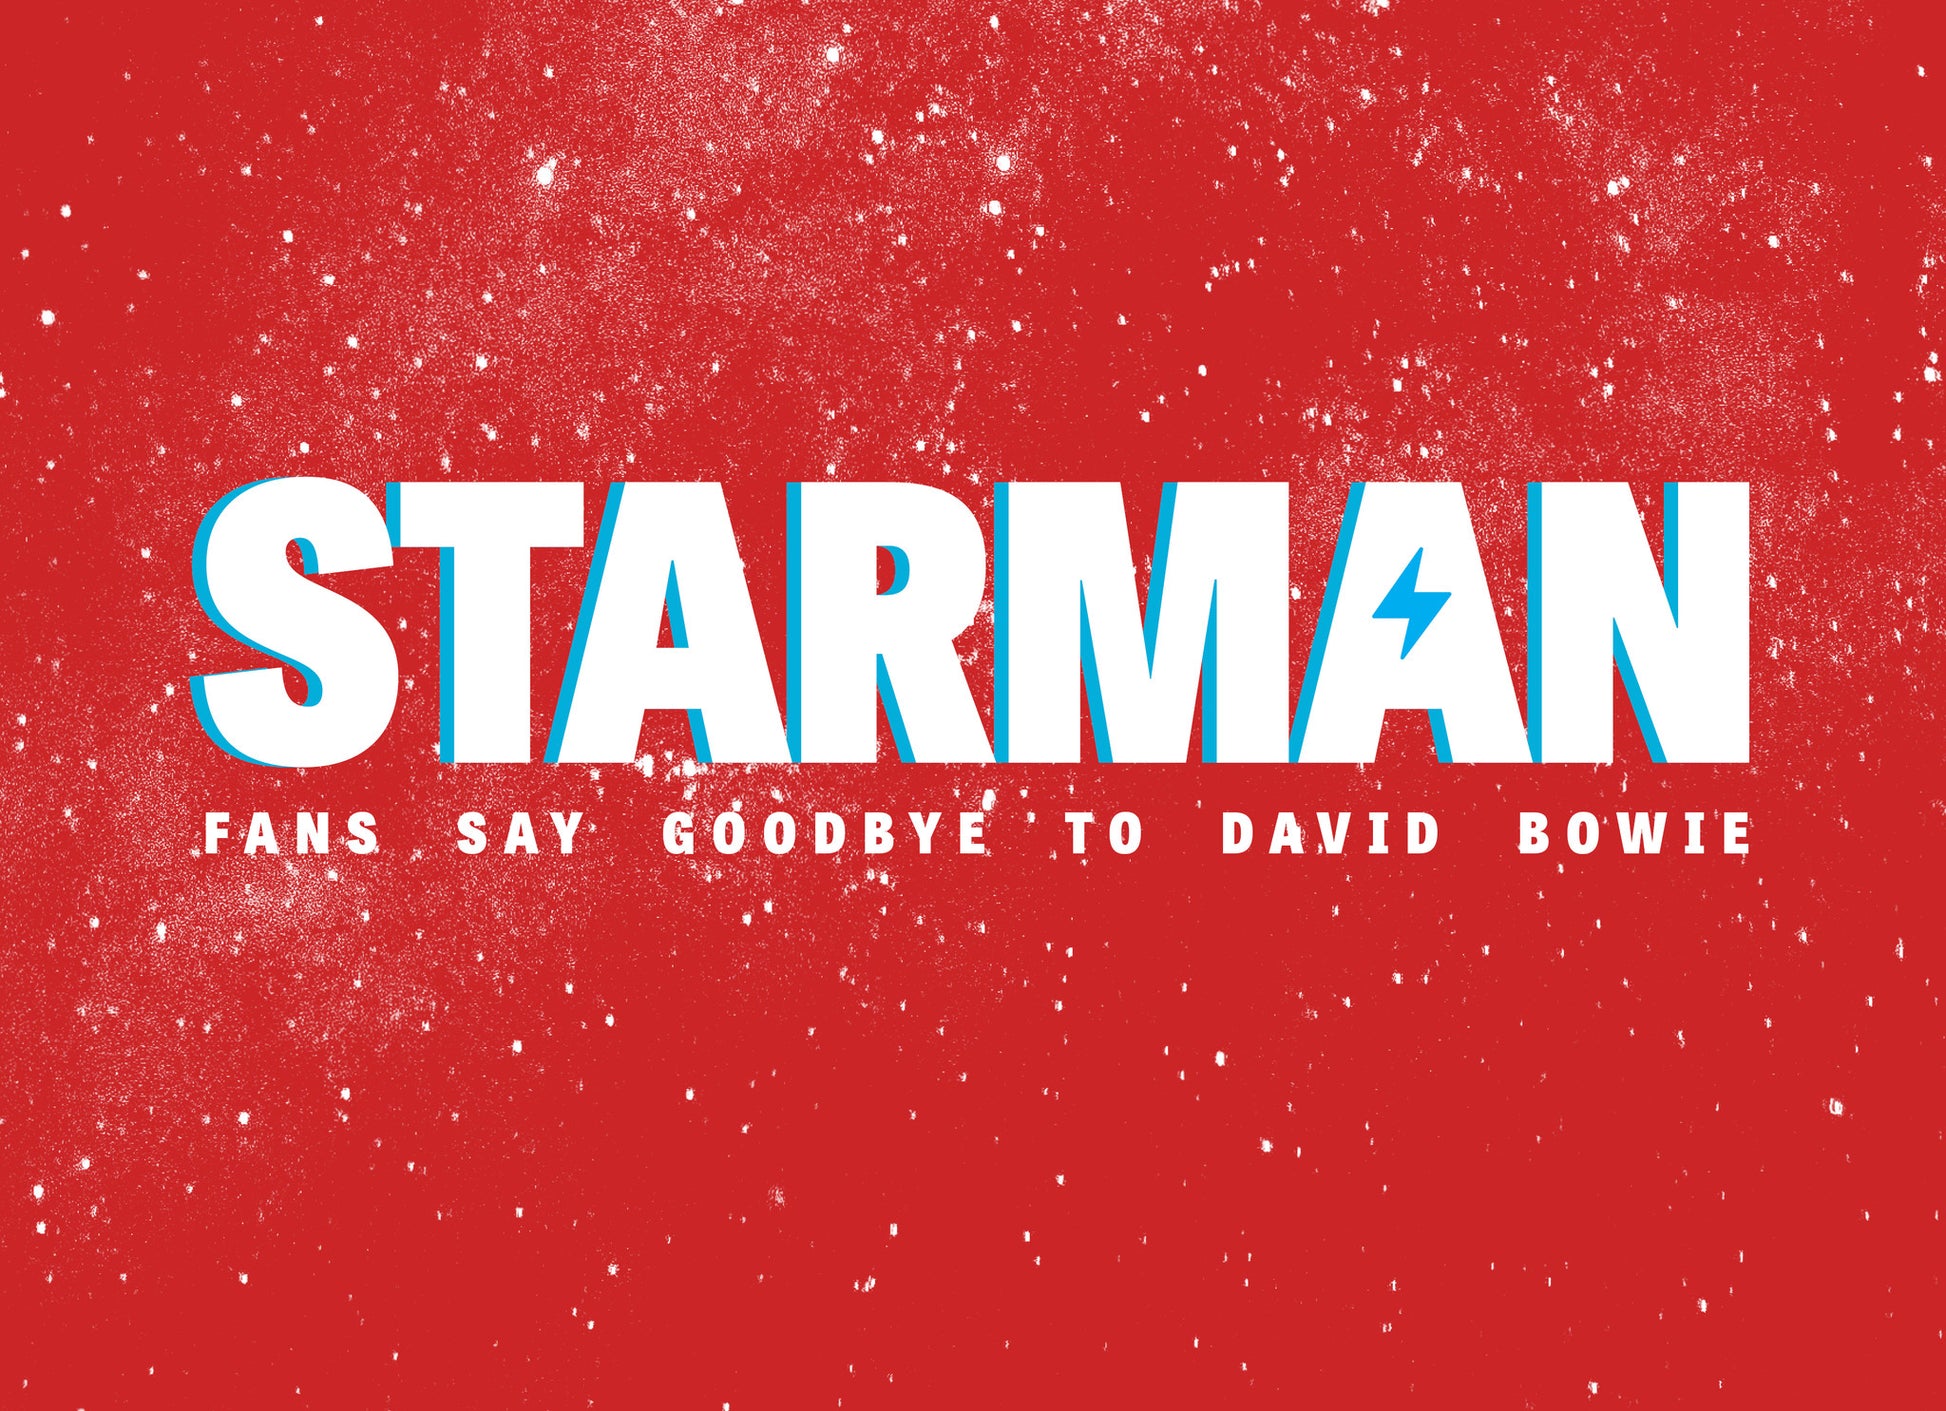 Starman: Fans Say Goodby to David Bowie